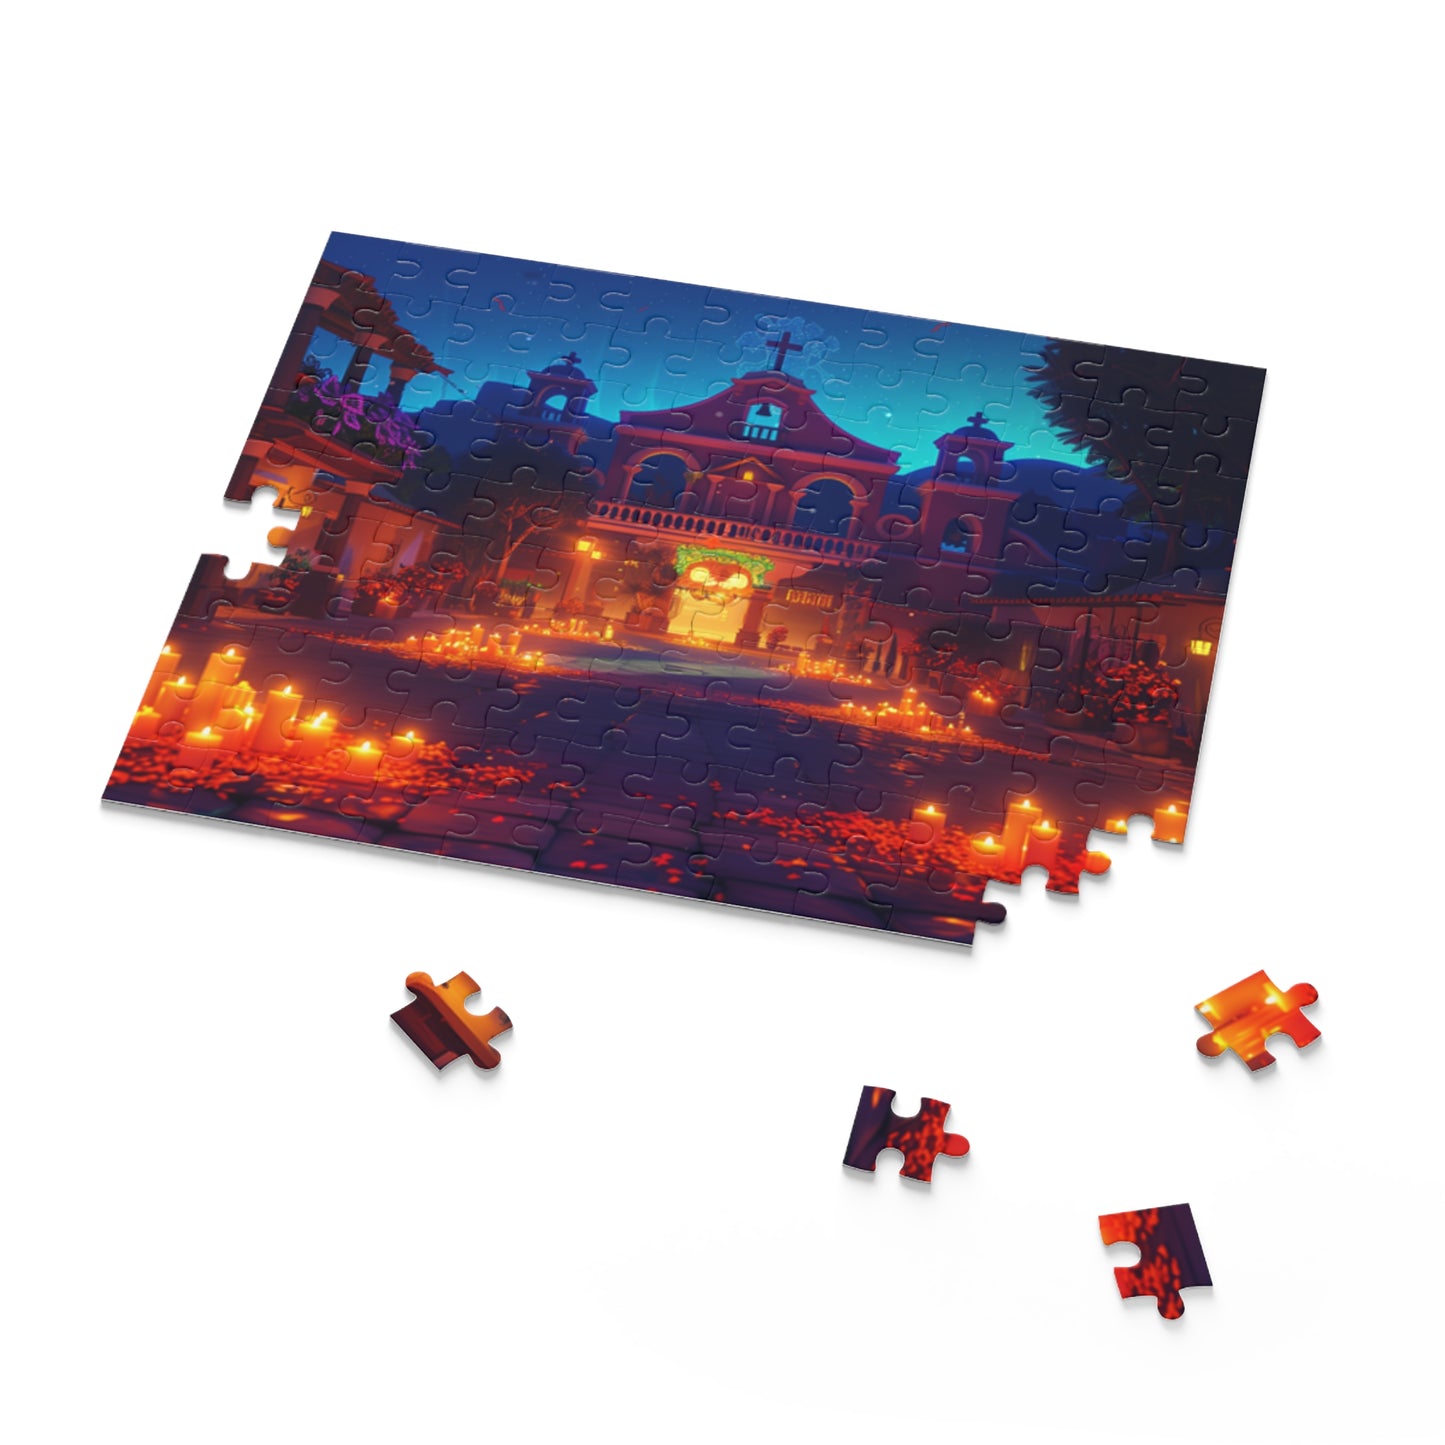 Mexican Art Church Candle Night Retro Jigsaw Puzzle Adult Birthday Business Jigsaw Puzzle Gift for Him Funny Humorous Indoor Outdoor Game Gift For Her Online-7